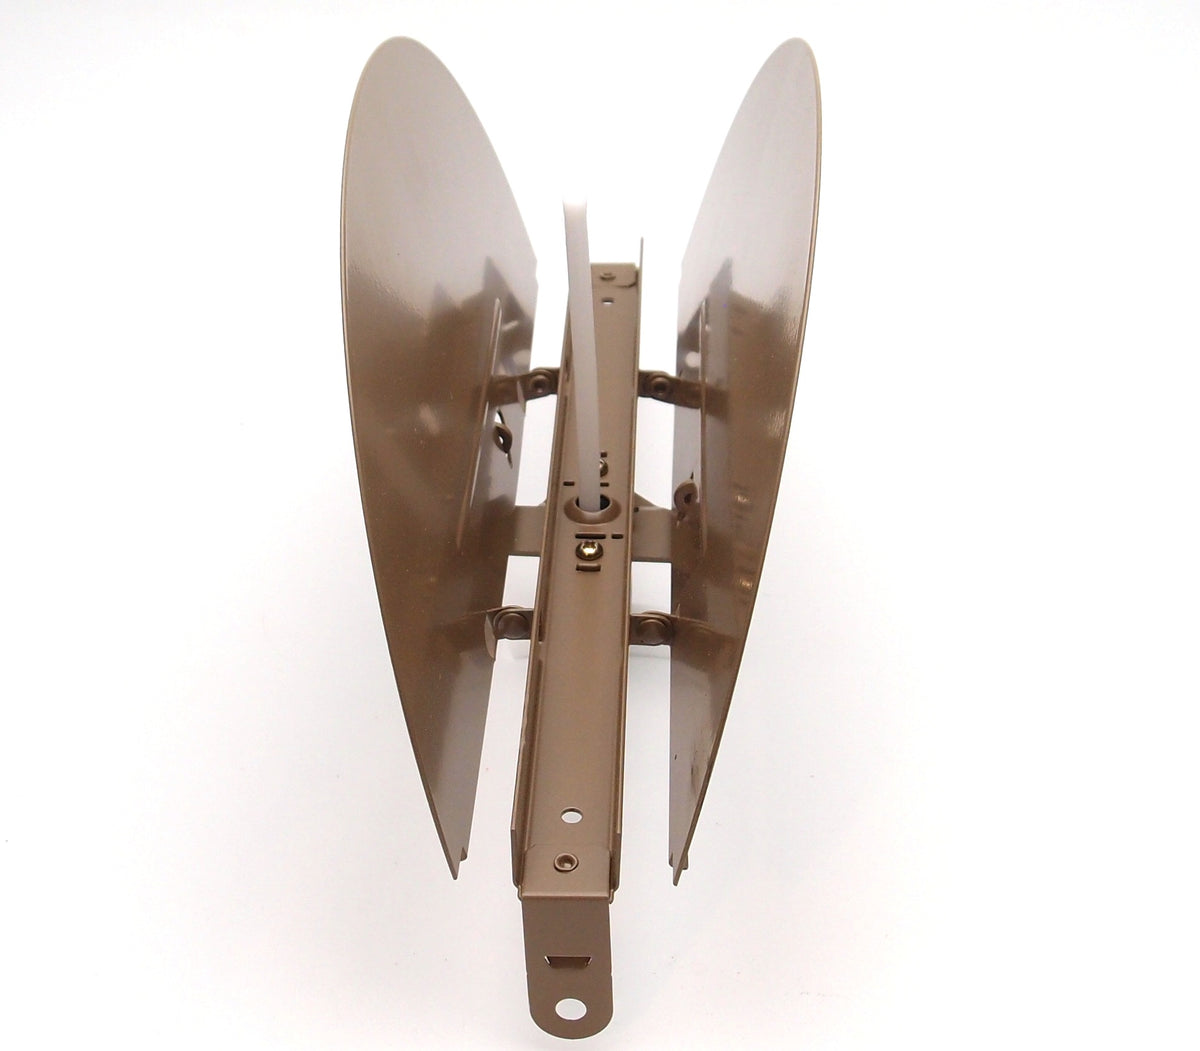 10&quot; BUTTERFLY DAMPER - For T-Bar, Drop Ceiling Grilles, Lay in Diffusers of 24x24 (10&quot; round duct opening)